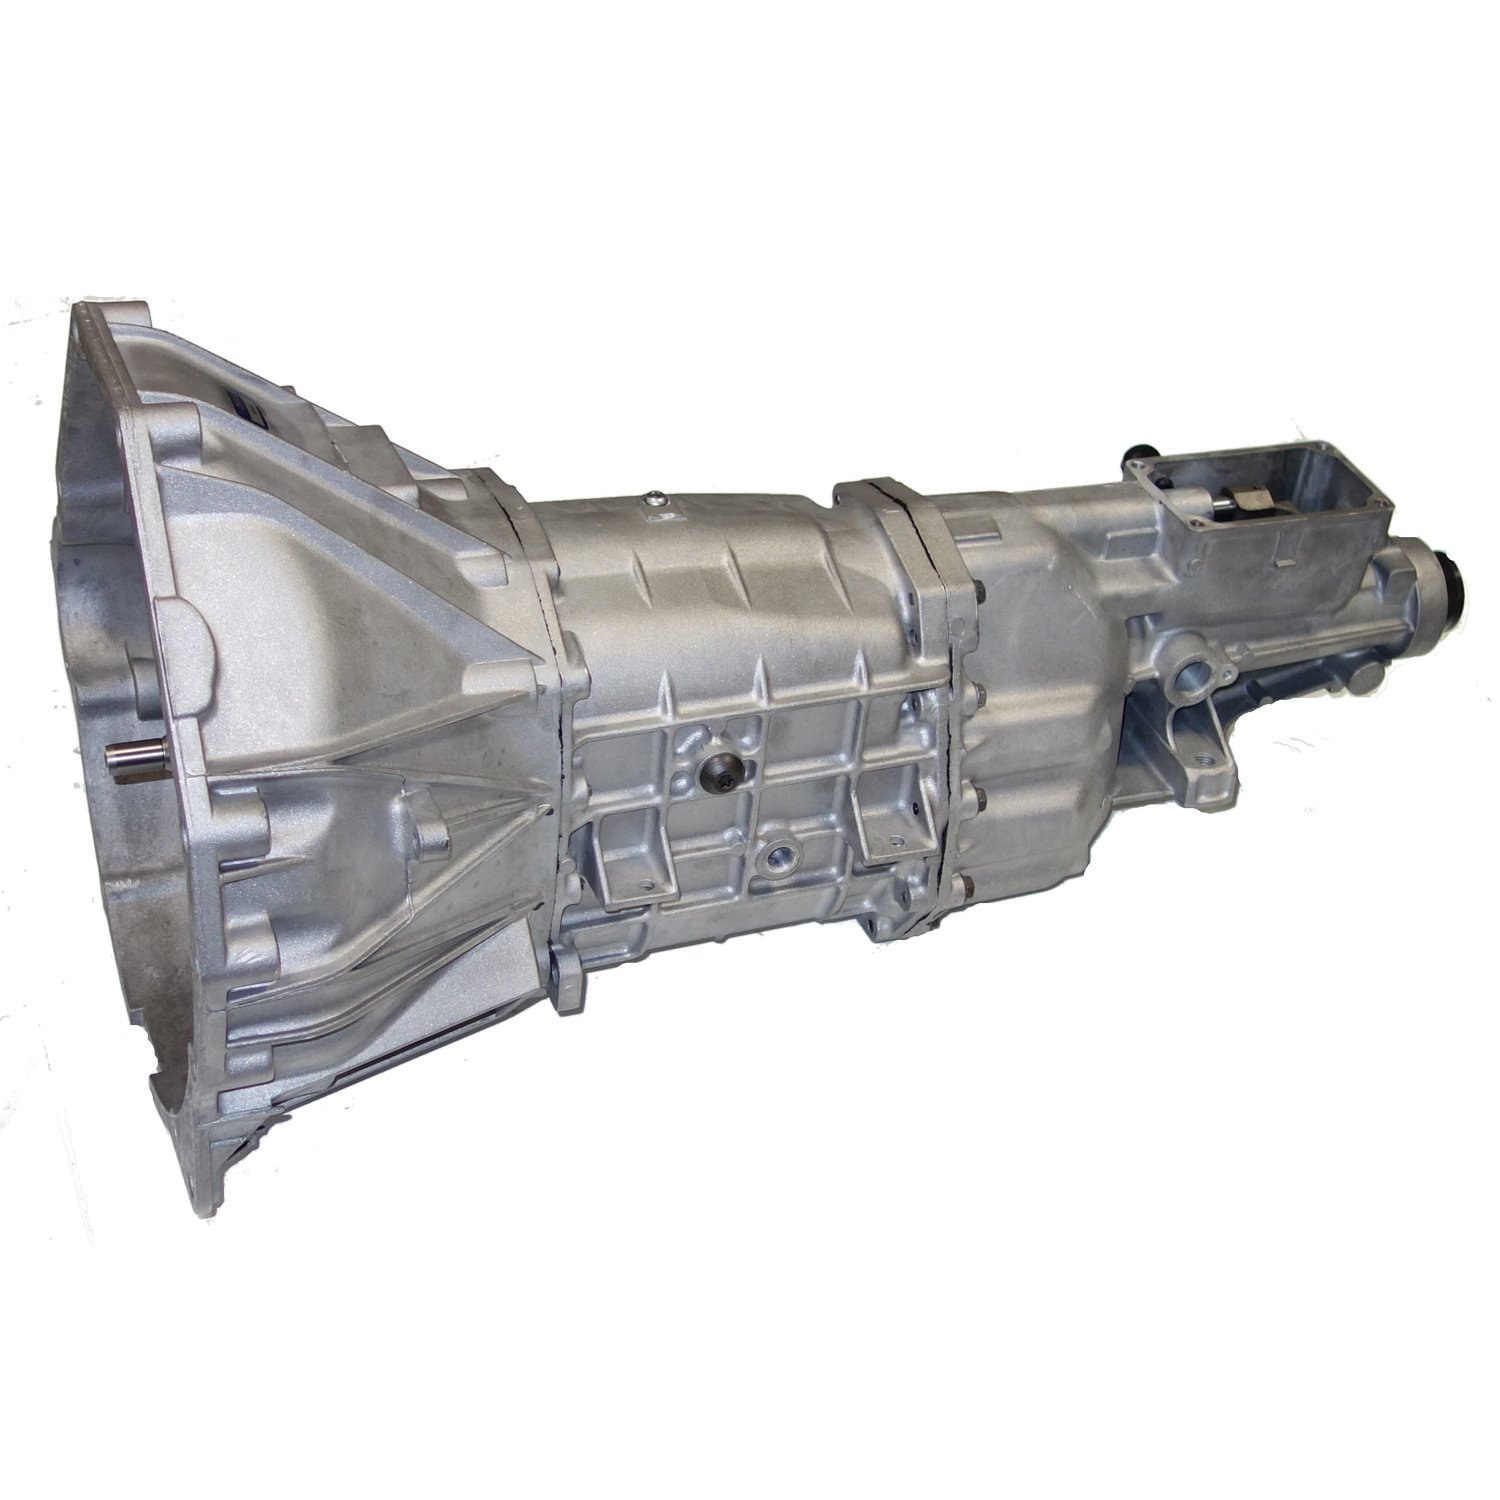 Remanufactured FM145 Manual Transmission for Ford 99-01 Mustang